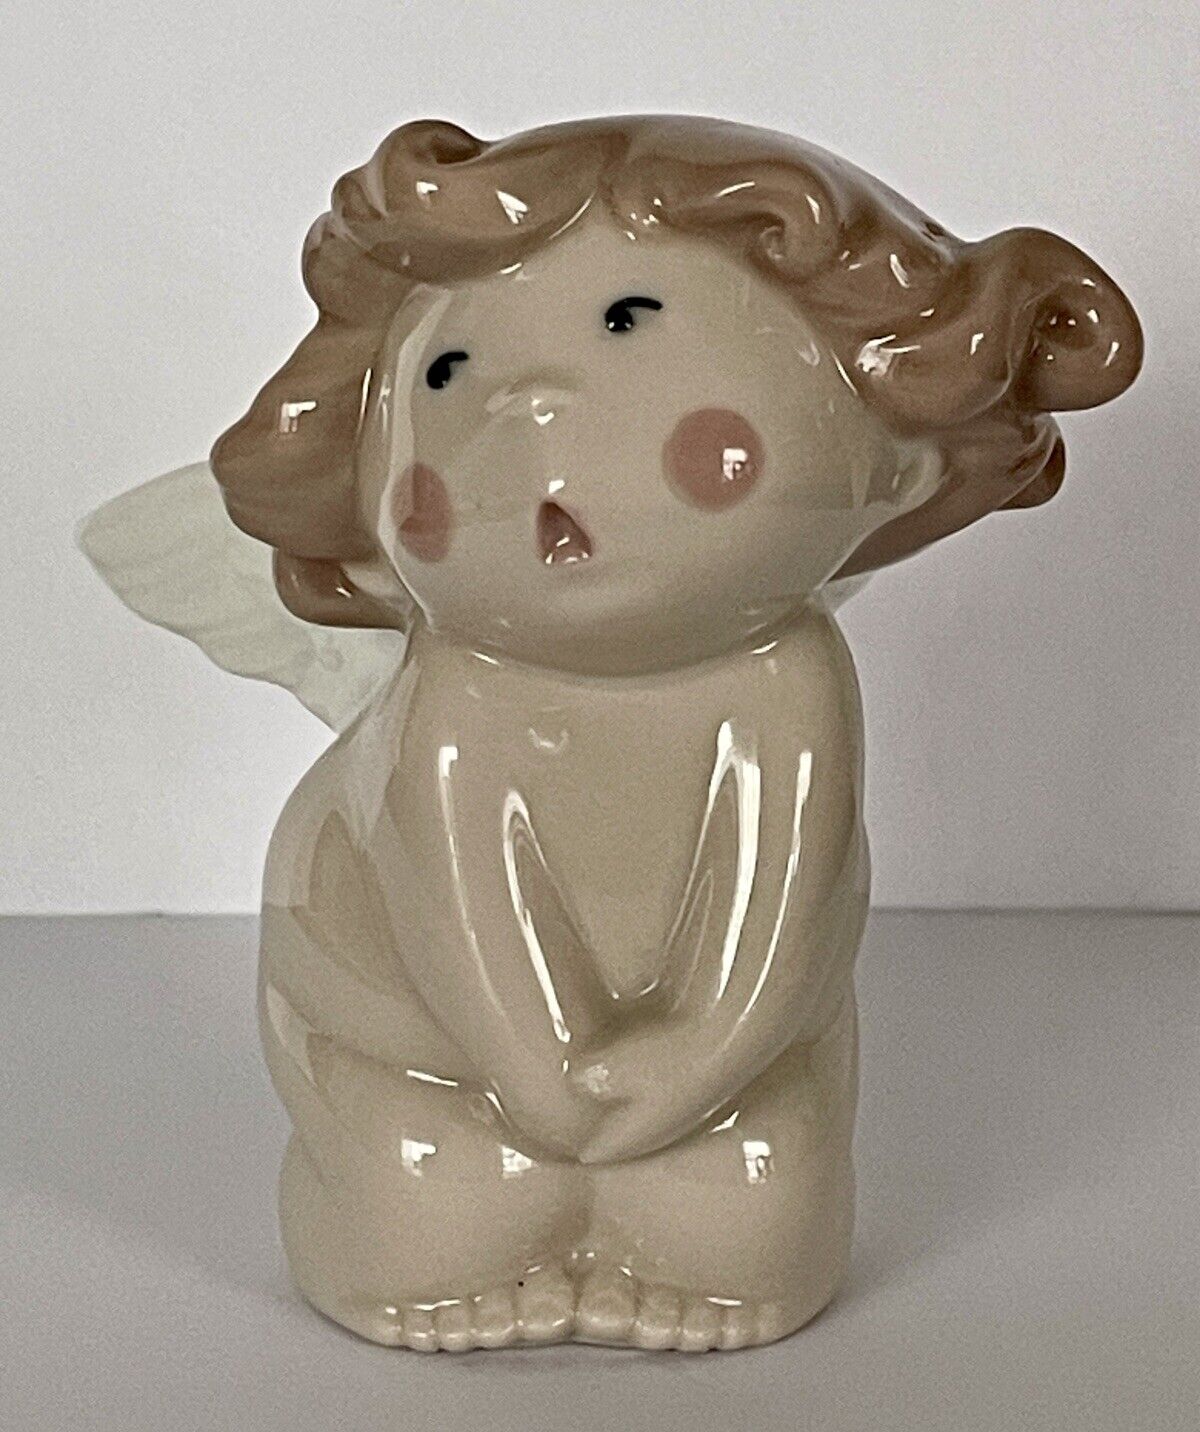 NAO LlADRÓ 2003 CHEEKY CHERUBS COLLECTION “GIGGLES OH NO ” PORCELAIN FIGURINE